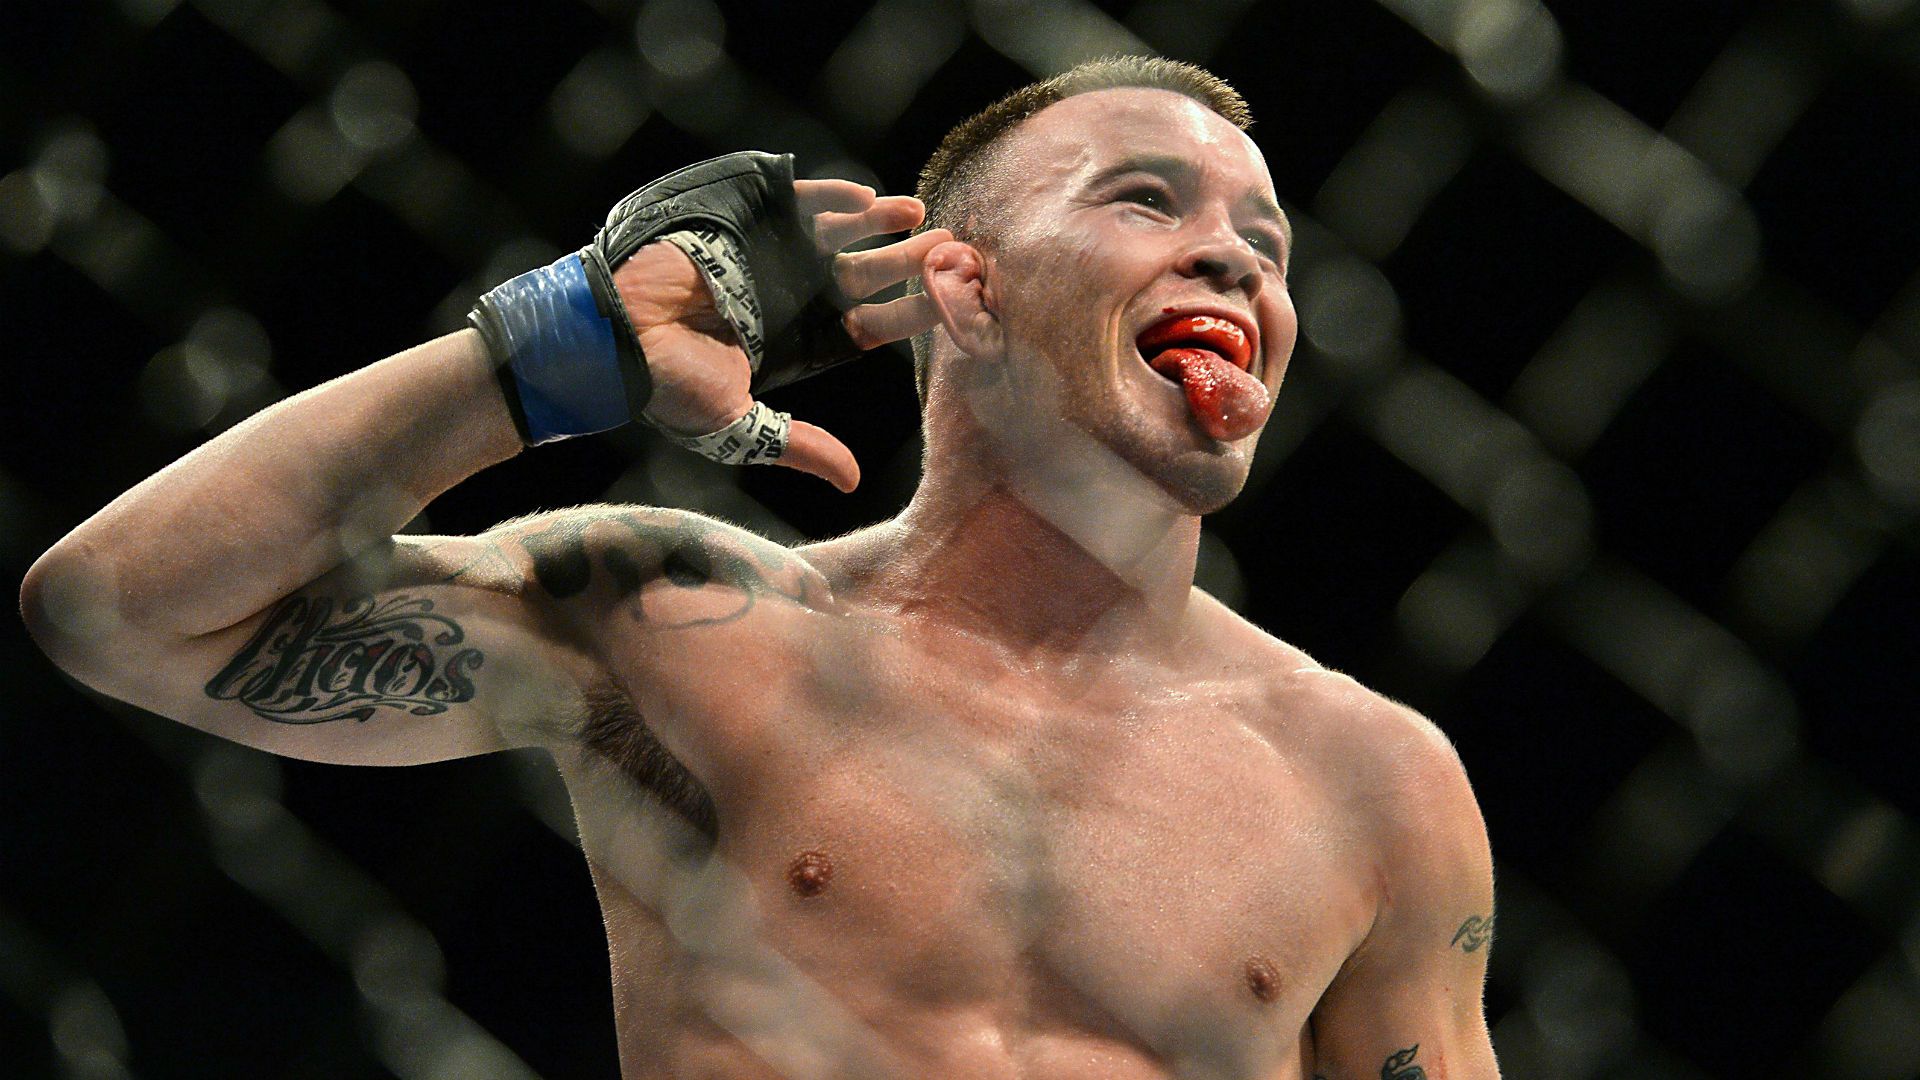 Colby Covington explains in detail why Robbie Lawler is a friend turned foe and being stripped of his interim title